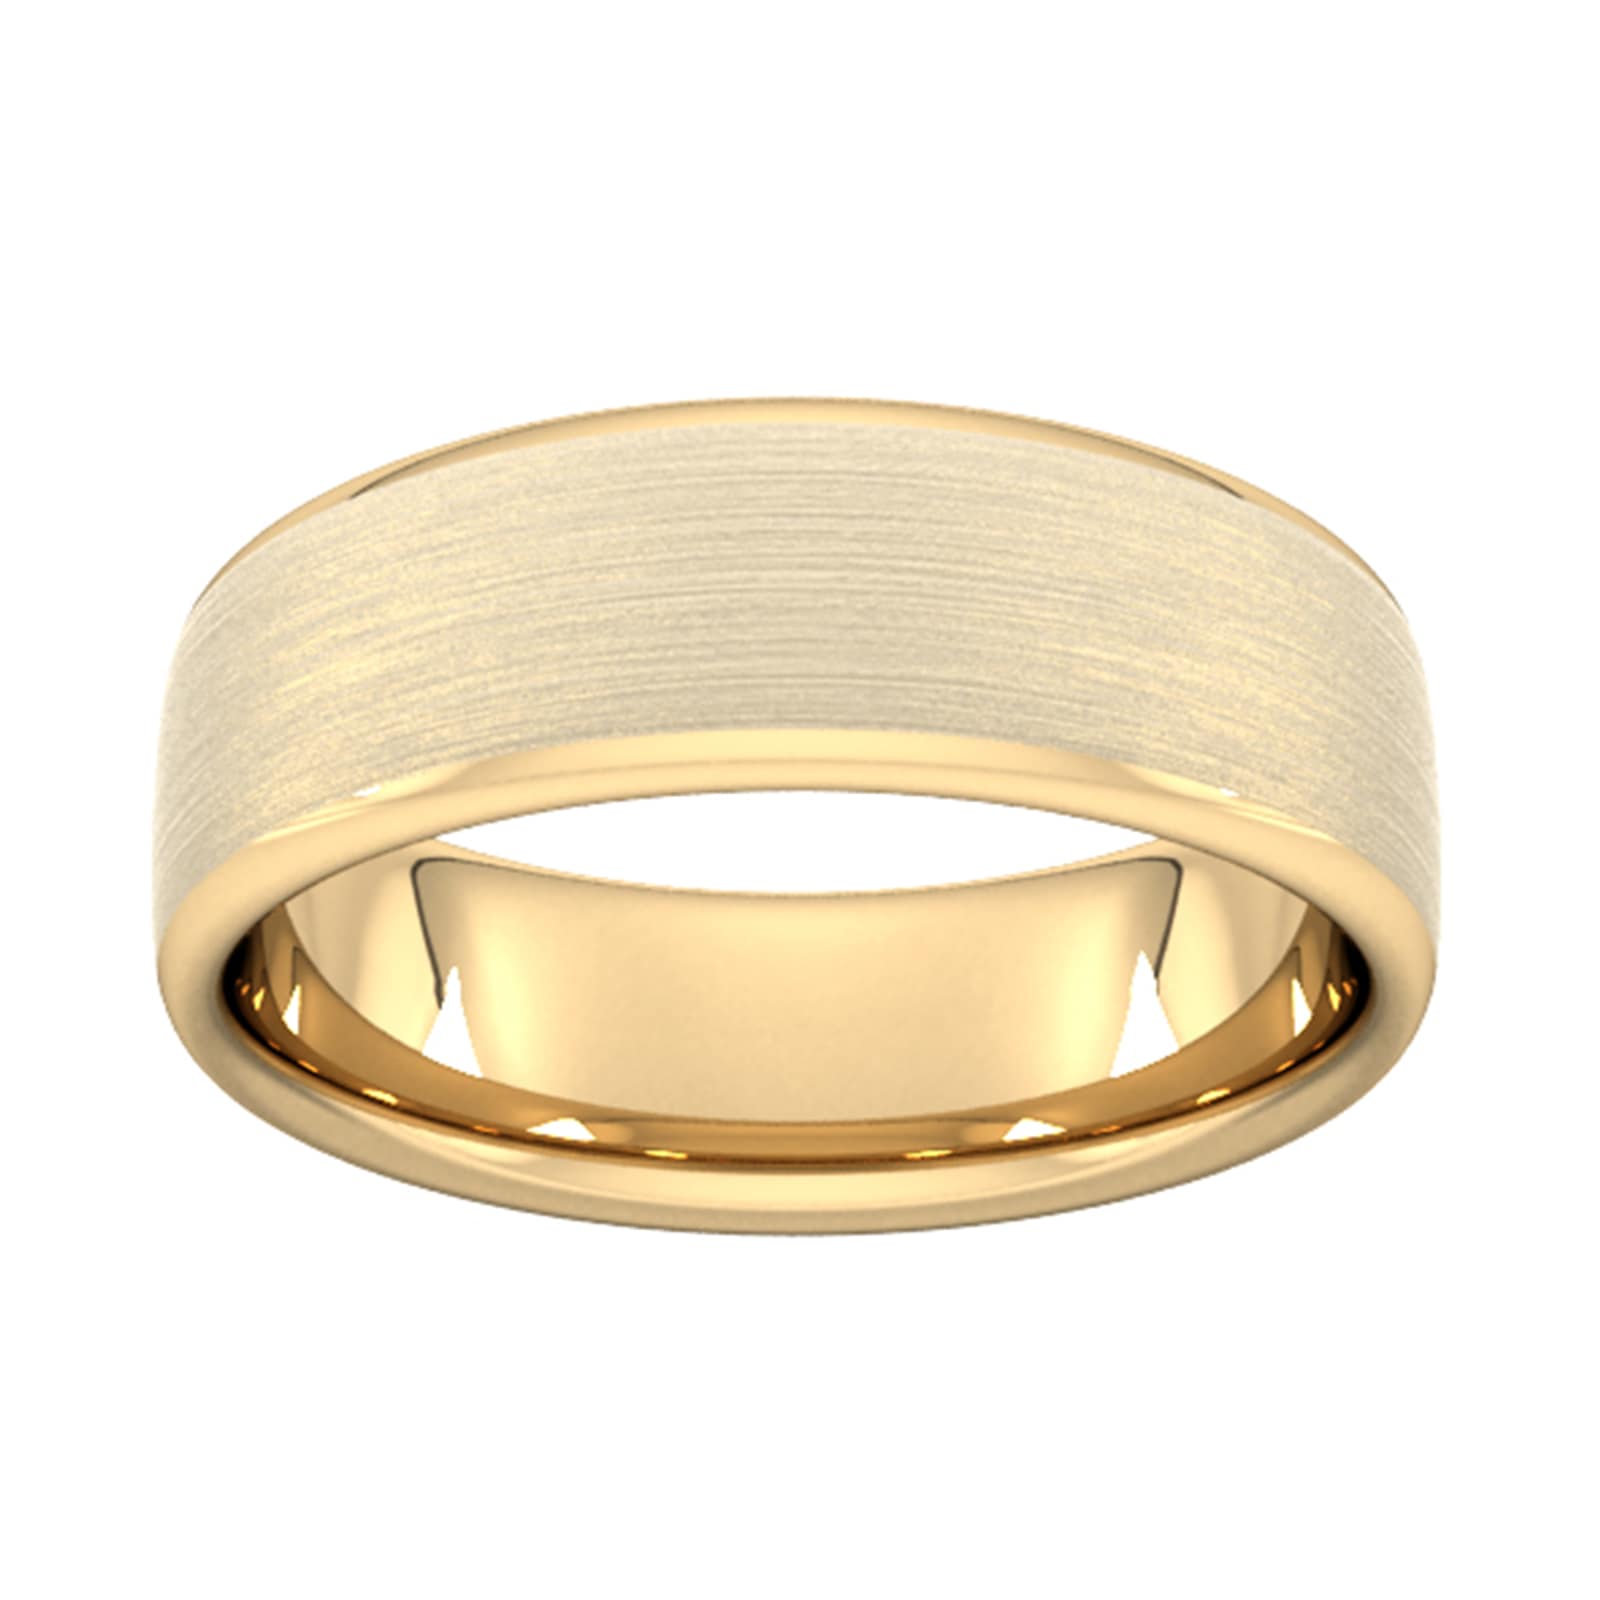 7mm Flat Court Heavy Matt Finished Wedding Ring In 9 Carat Yellow Gold - Ring Size Z